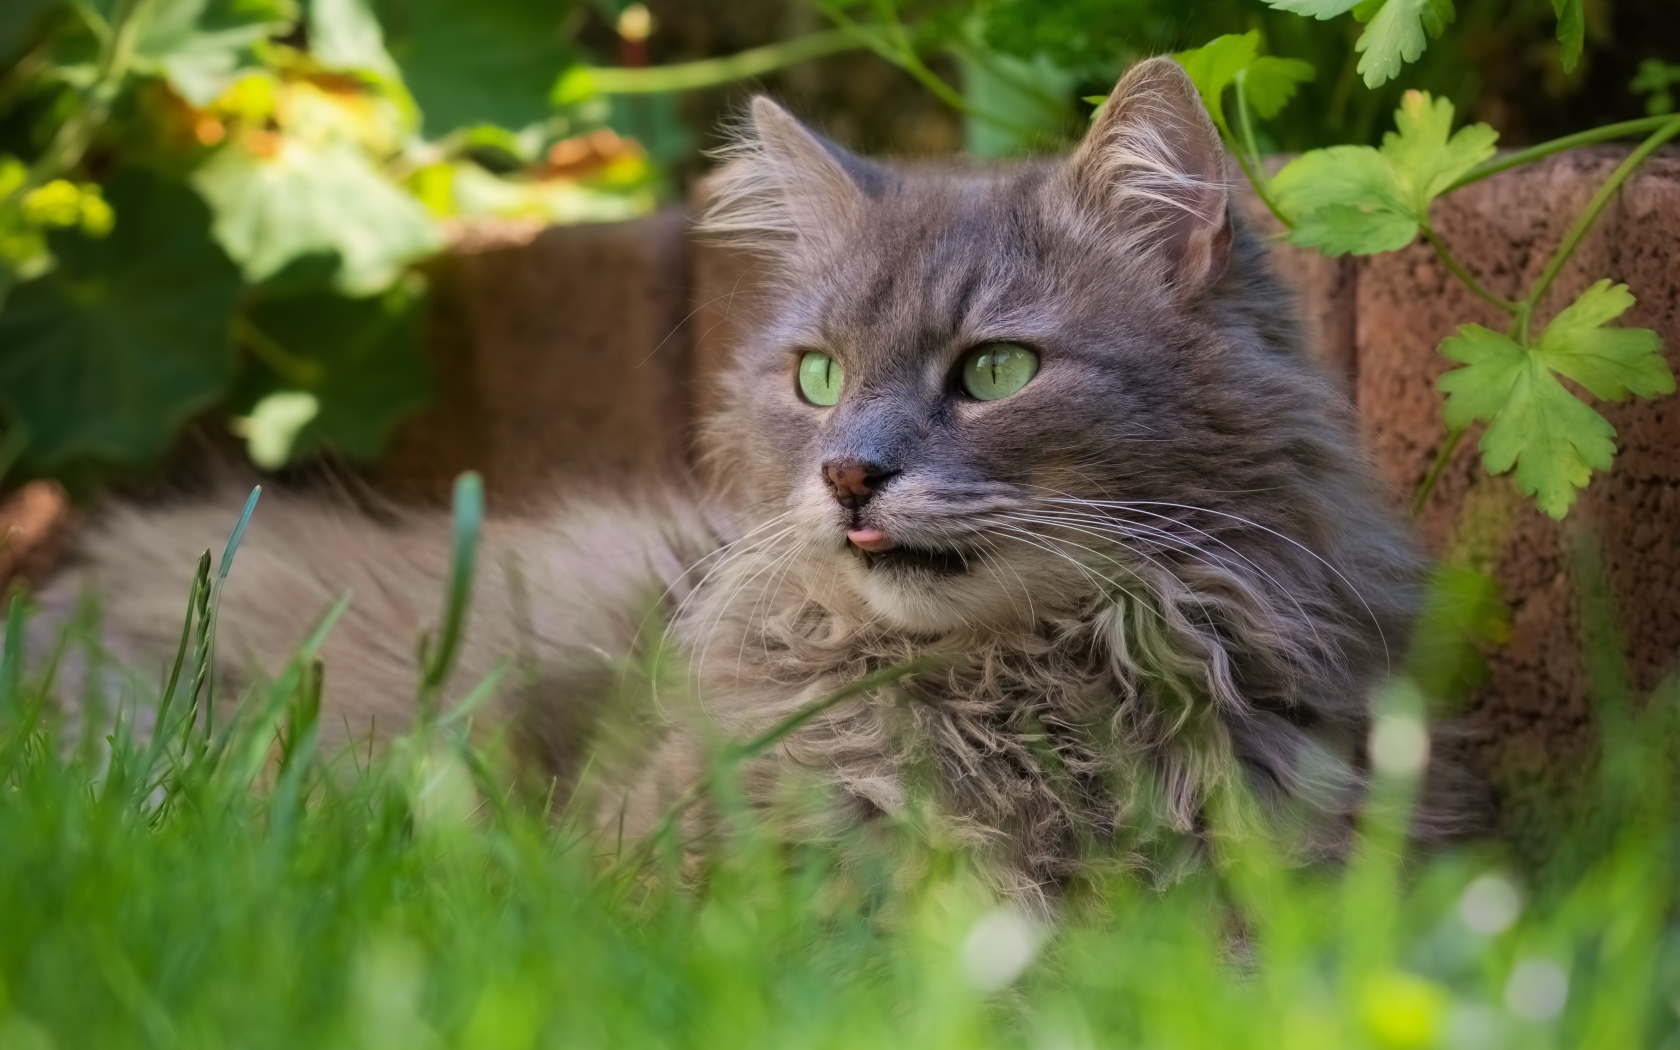 Fluffy gray cat is sitting in the green grass.